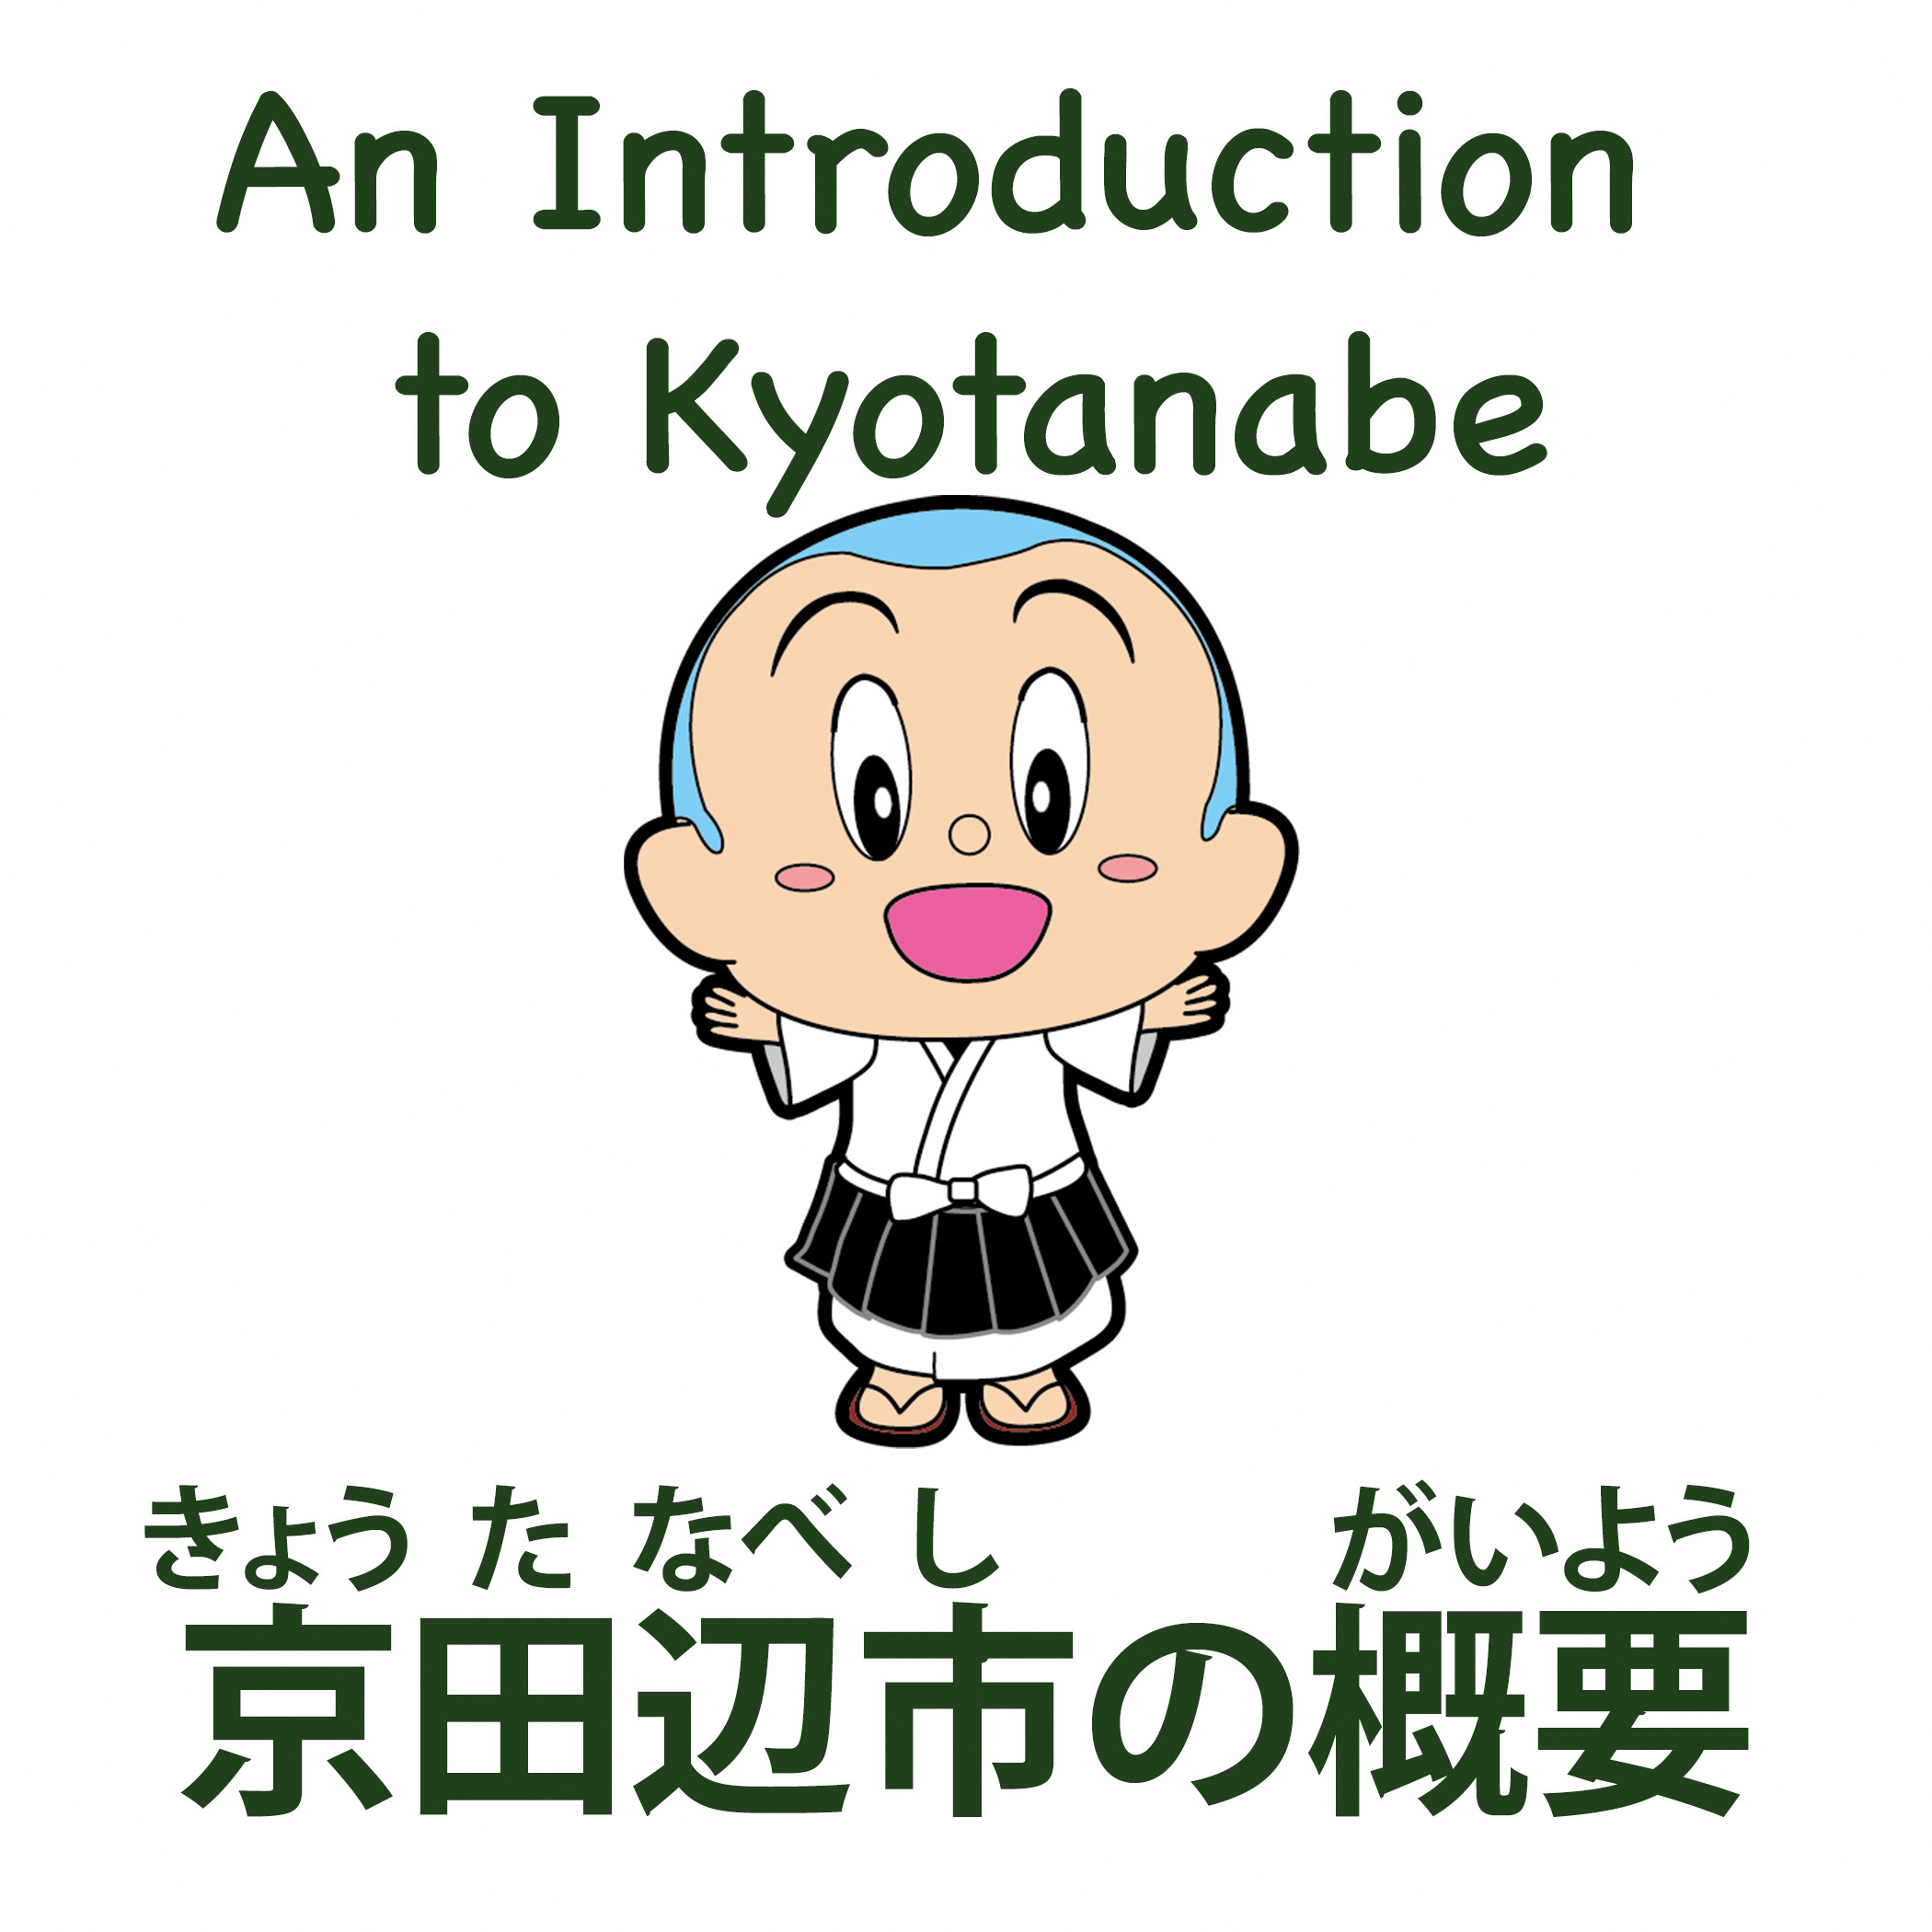 about kyotanabe